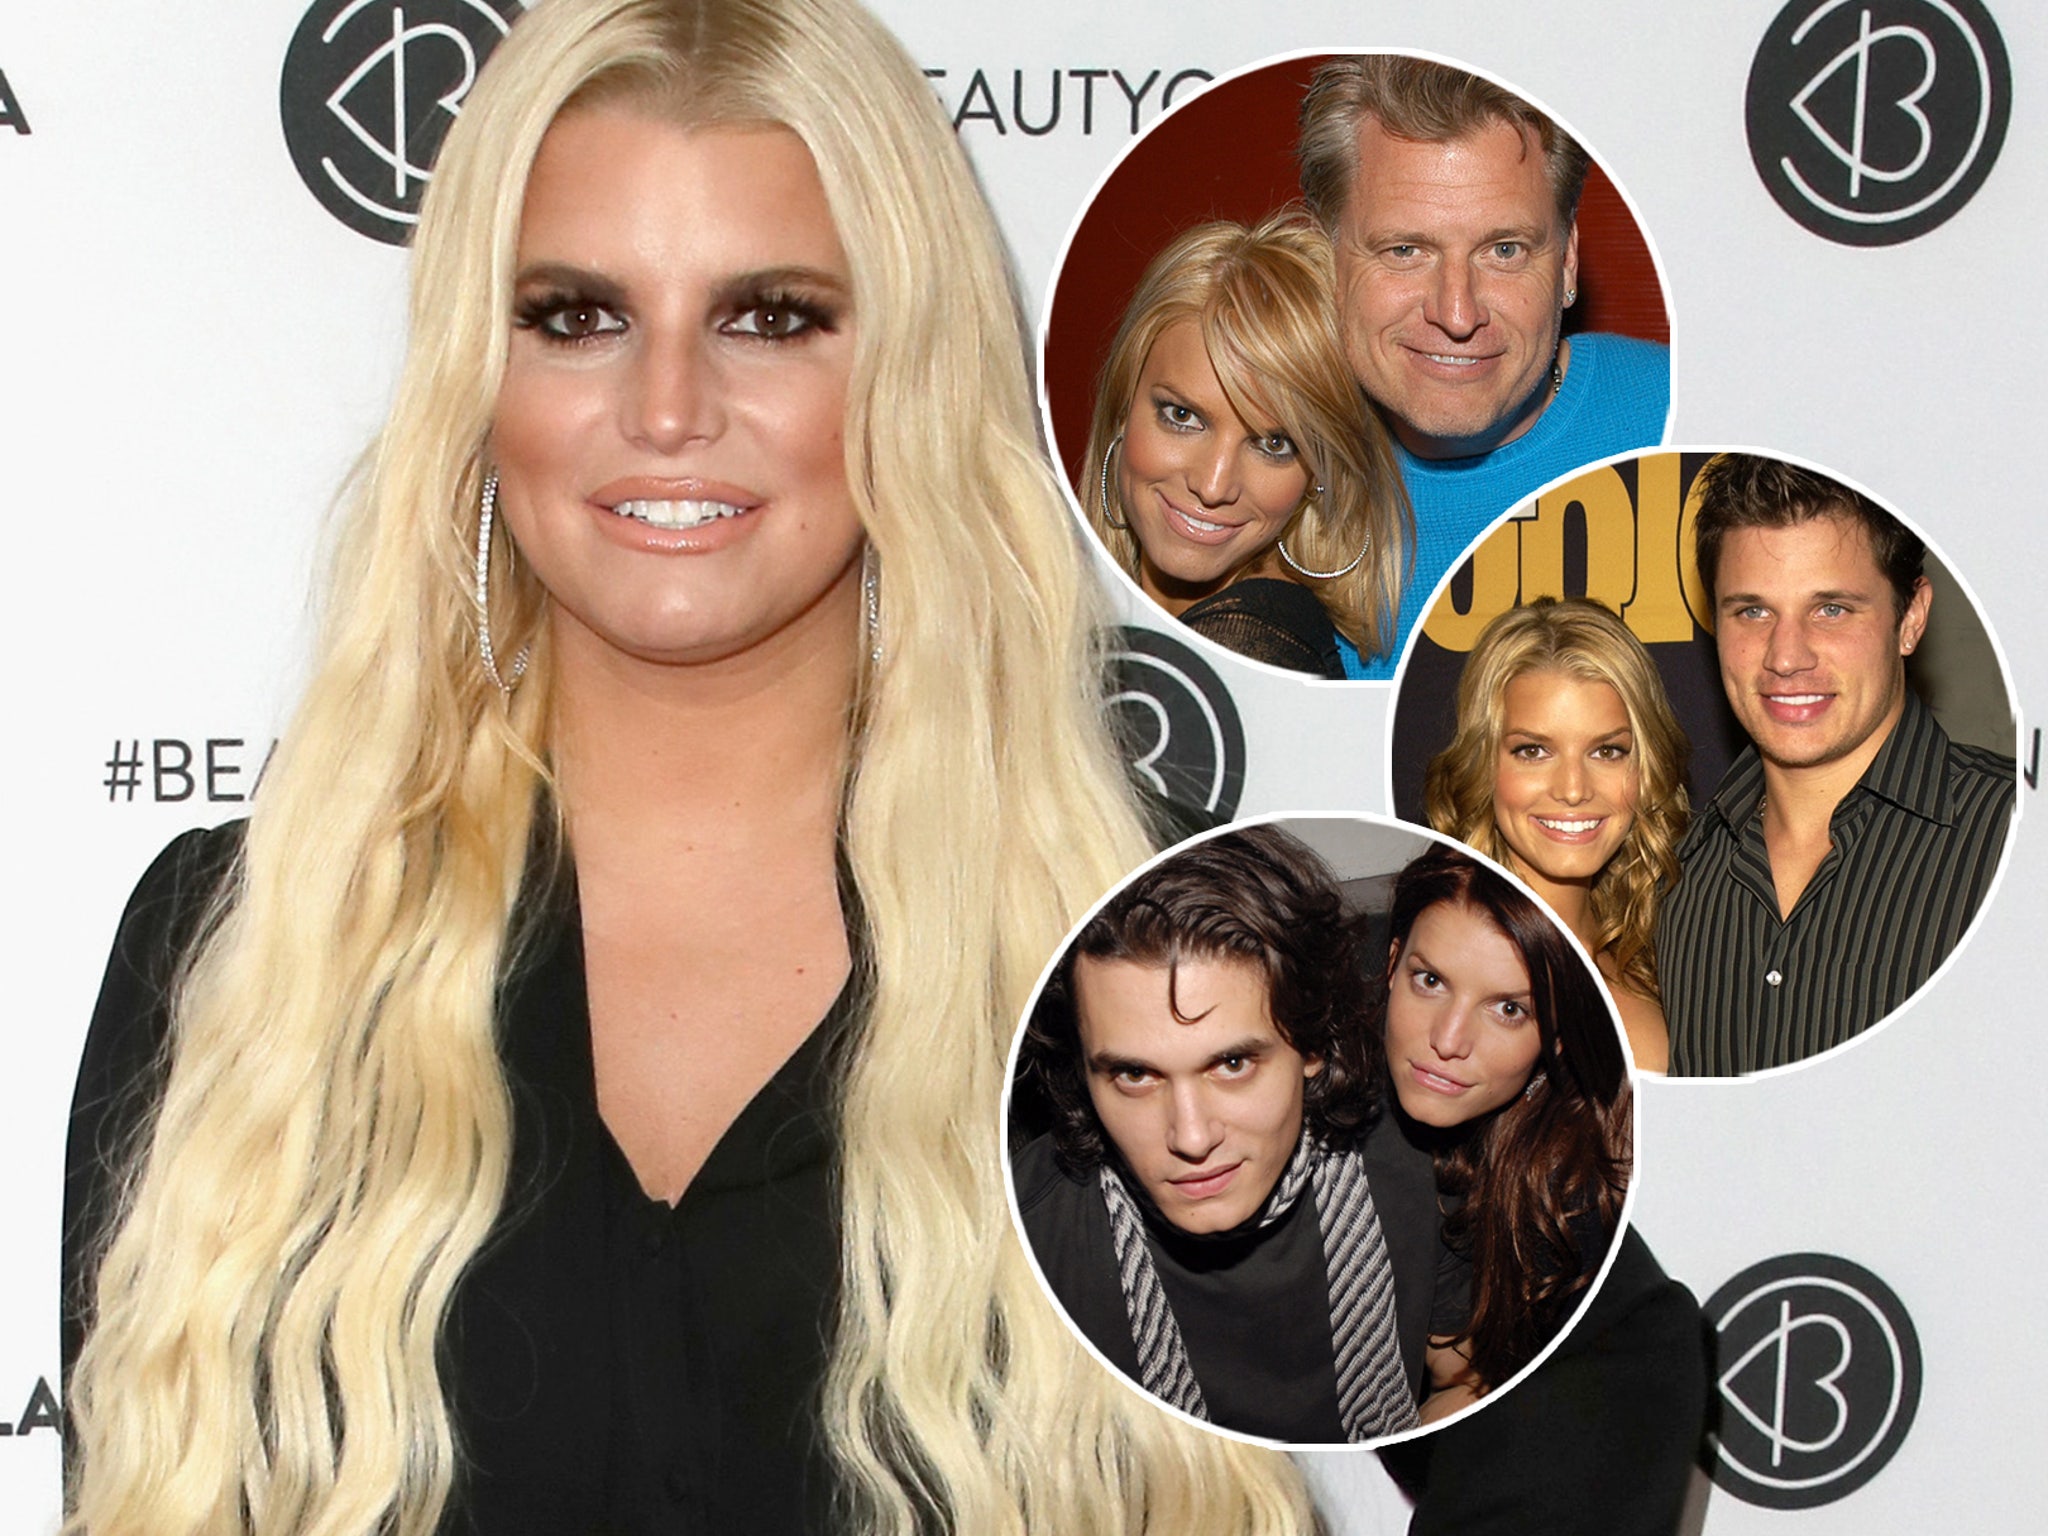 Jessica Simpson Reveals How Writing Her Book Was Like 'Family